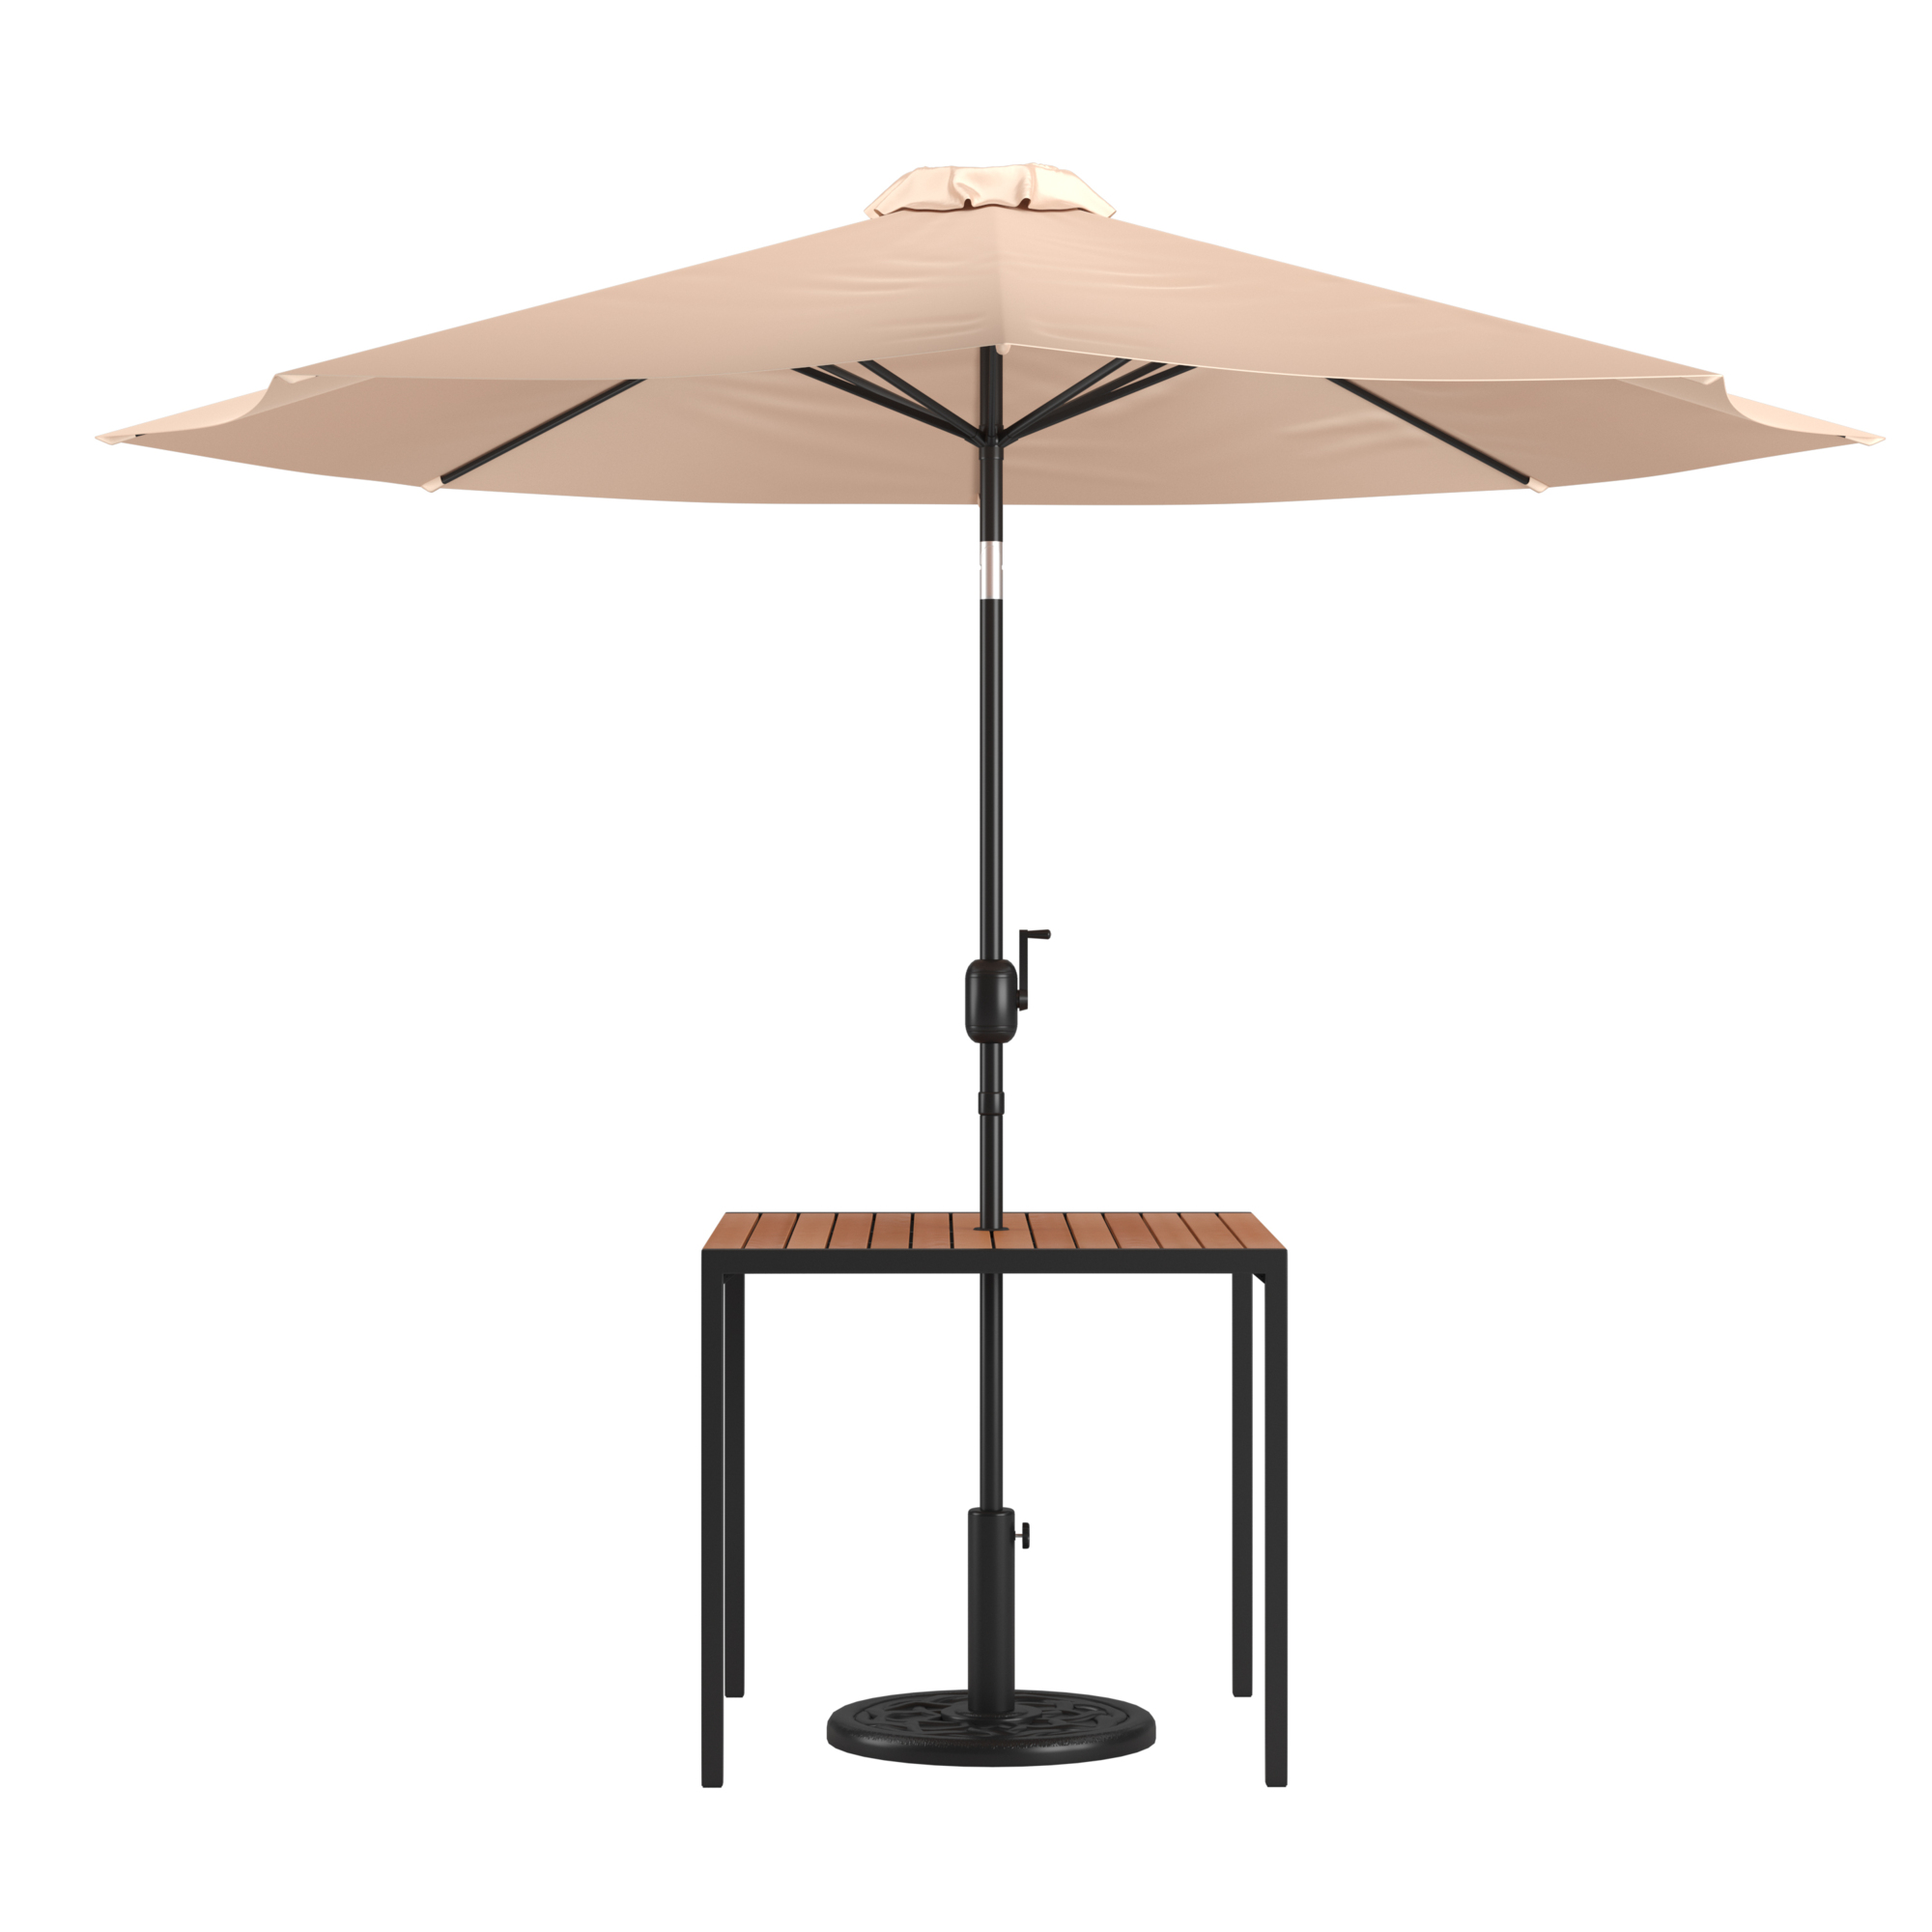 Flash Furniture, Faux Teak 35Inch Patio Table-Tan Umbrella Base, Table Shape Square, Primary Color Beige, Height 29.5 in, Model XU8100UB19BTN